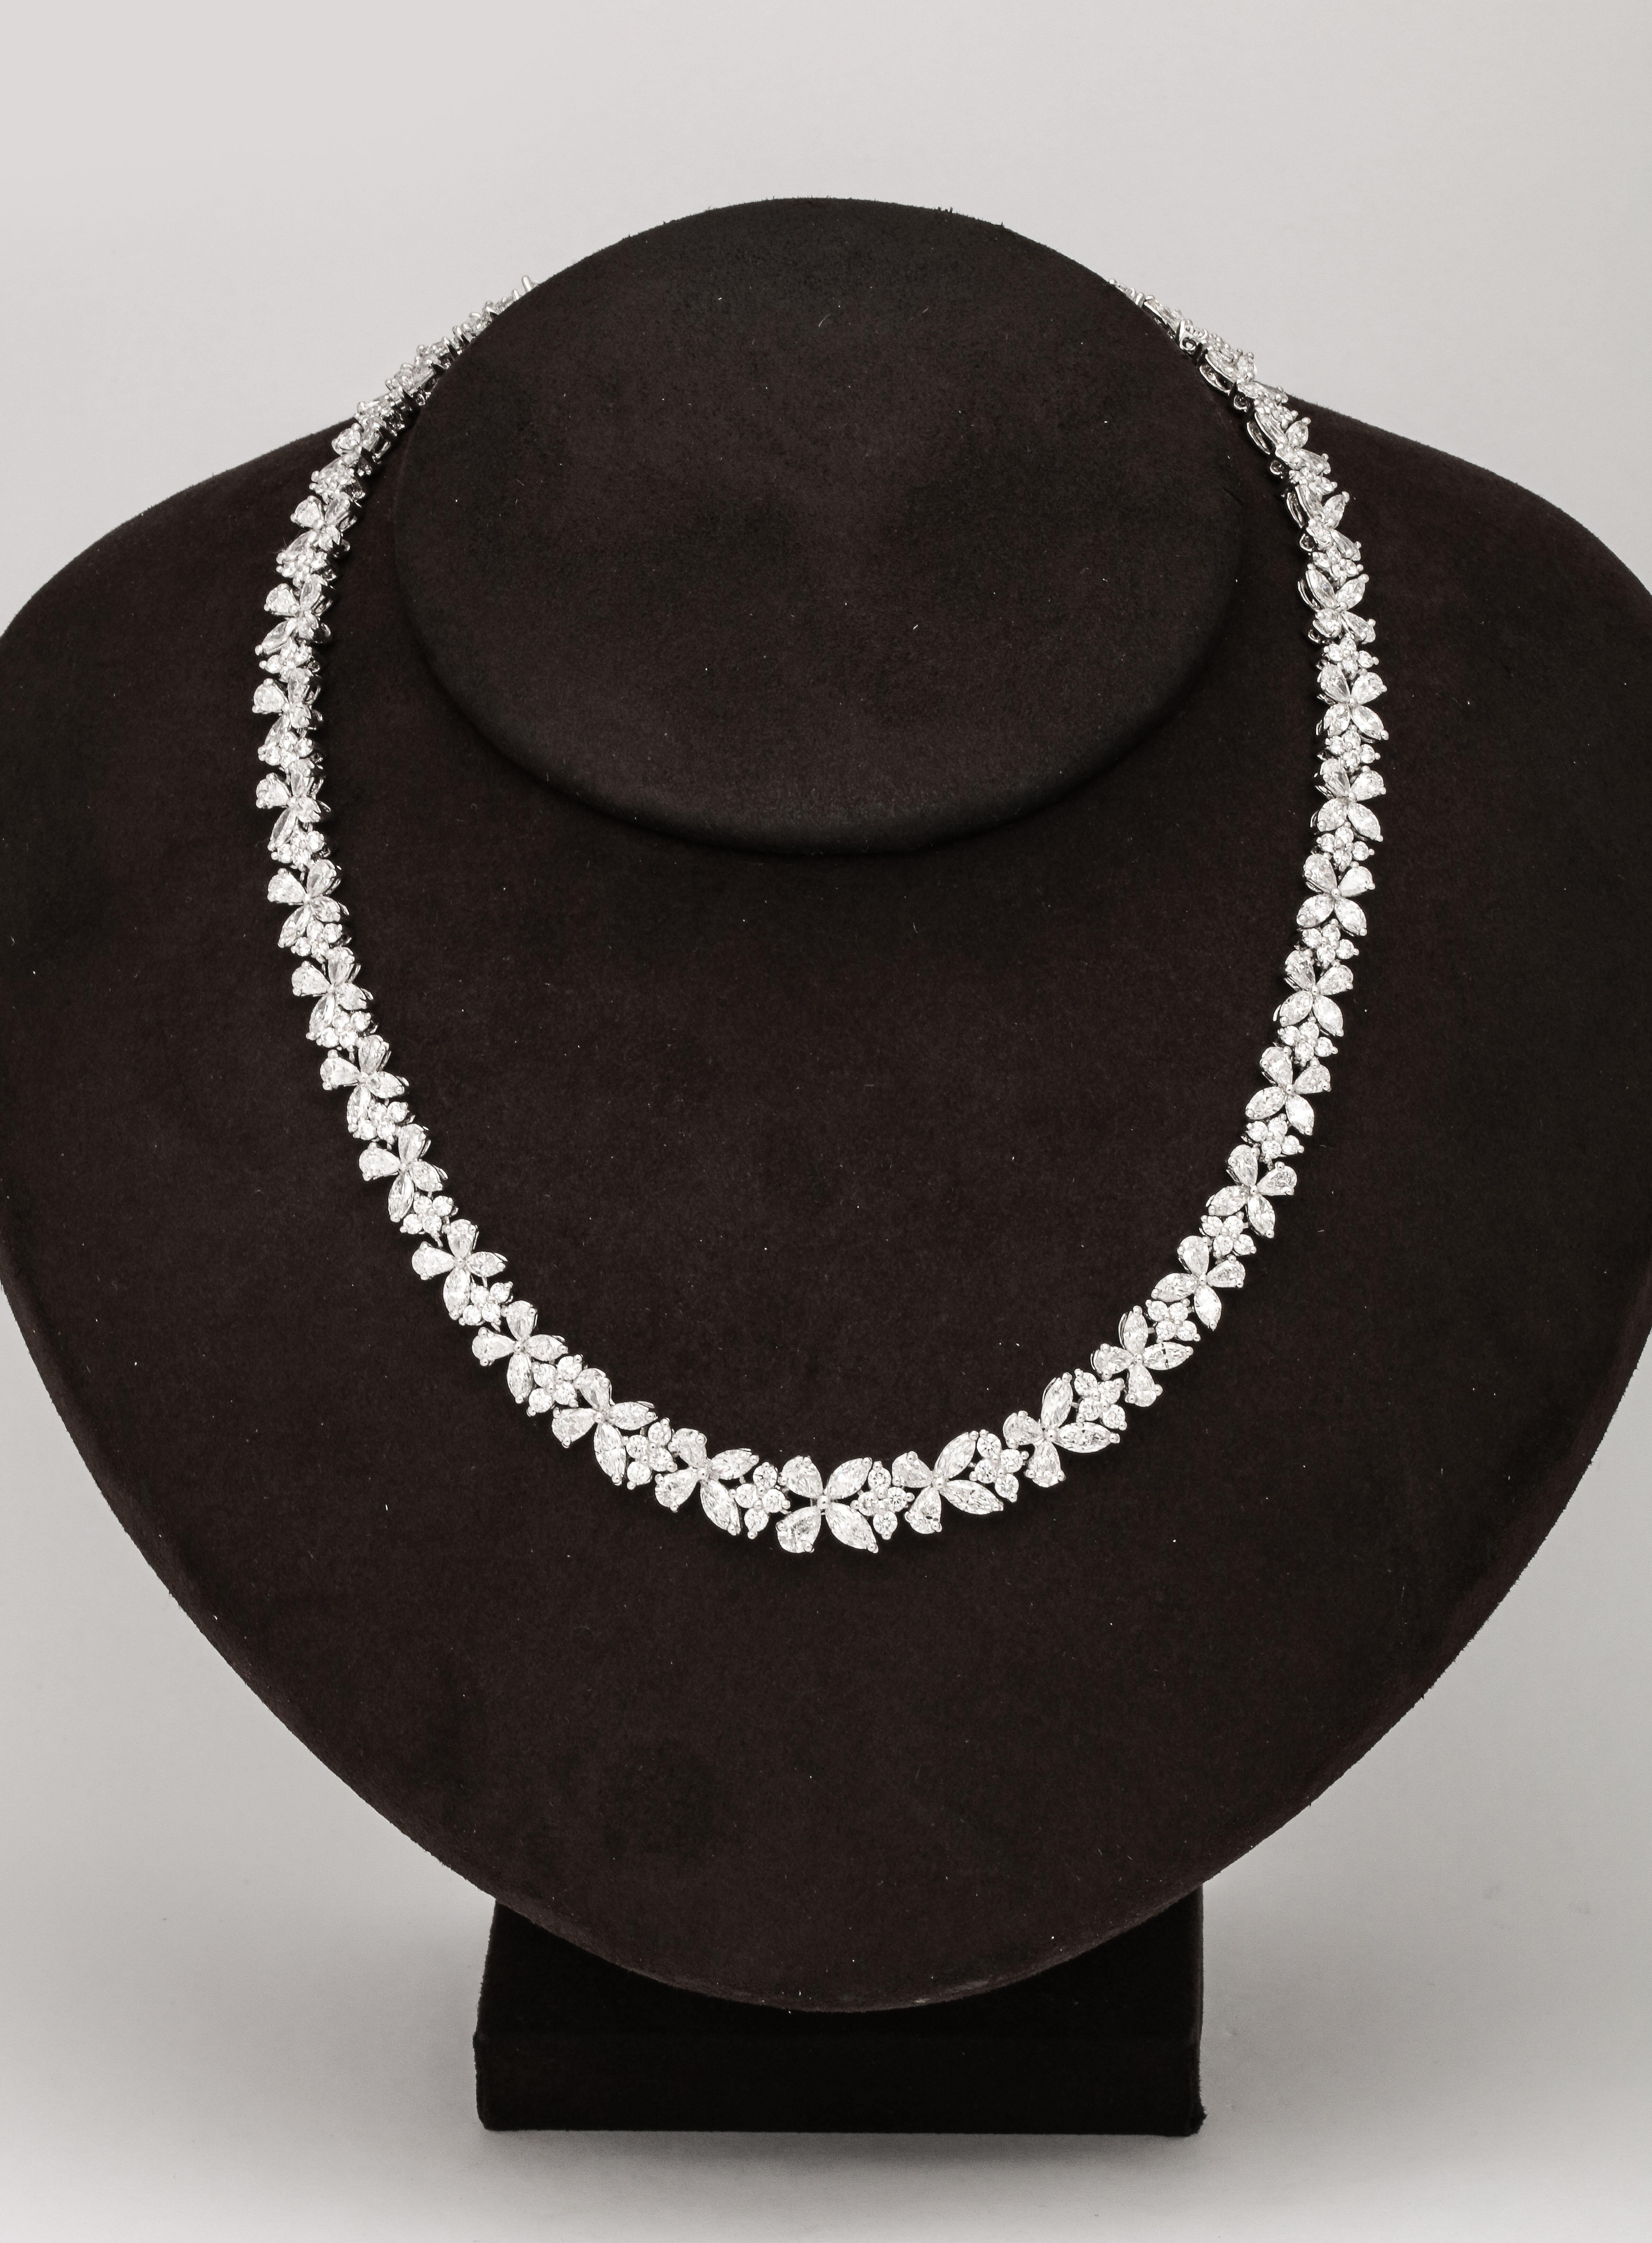 
An elegant and timeless design. 

30.95 carats of white pear, marquise and round brilliant cut diamonds set in platinum. 

16 inch length. 
